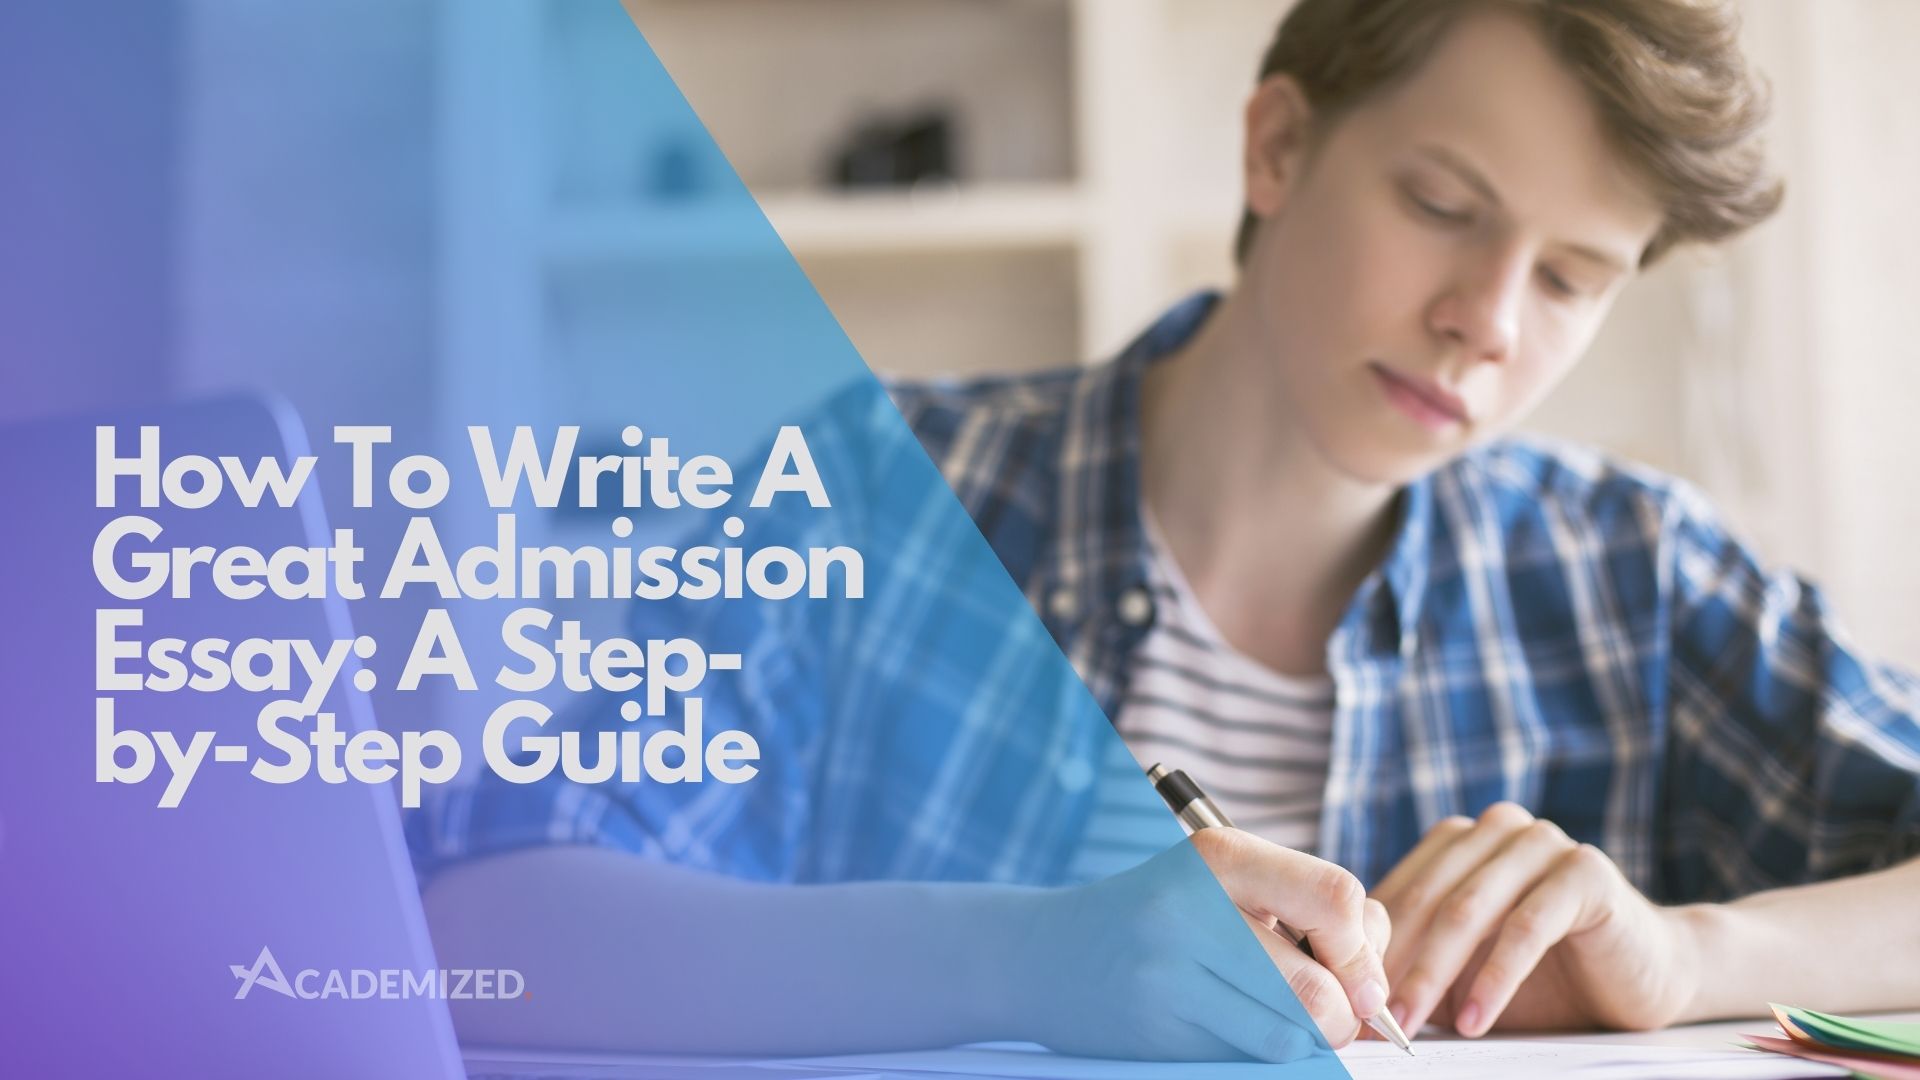 How To Write A Great Admission Essay: A Step-by-Step Guide